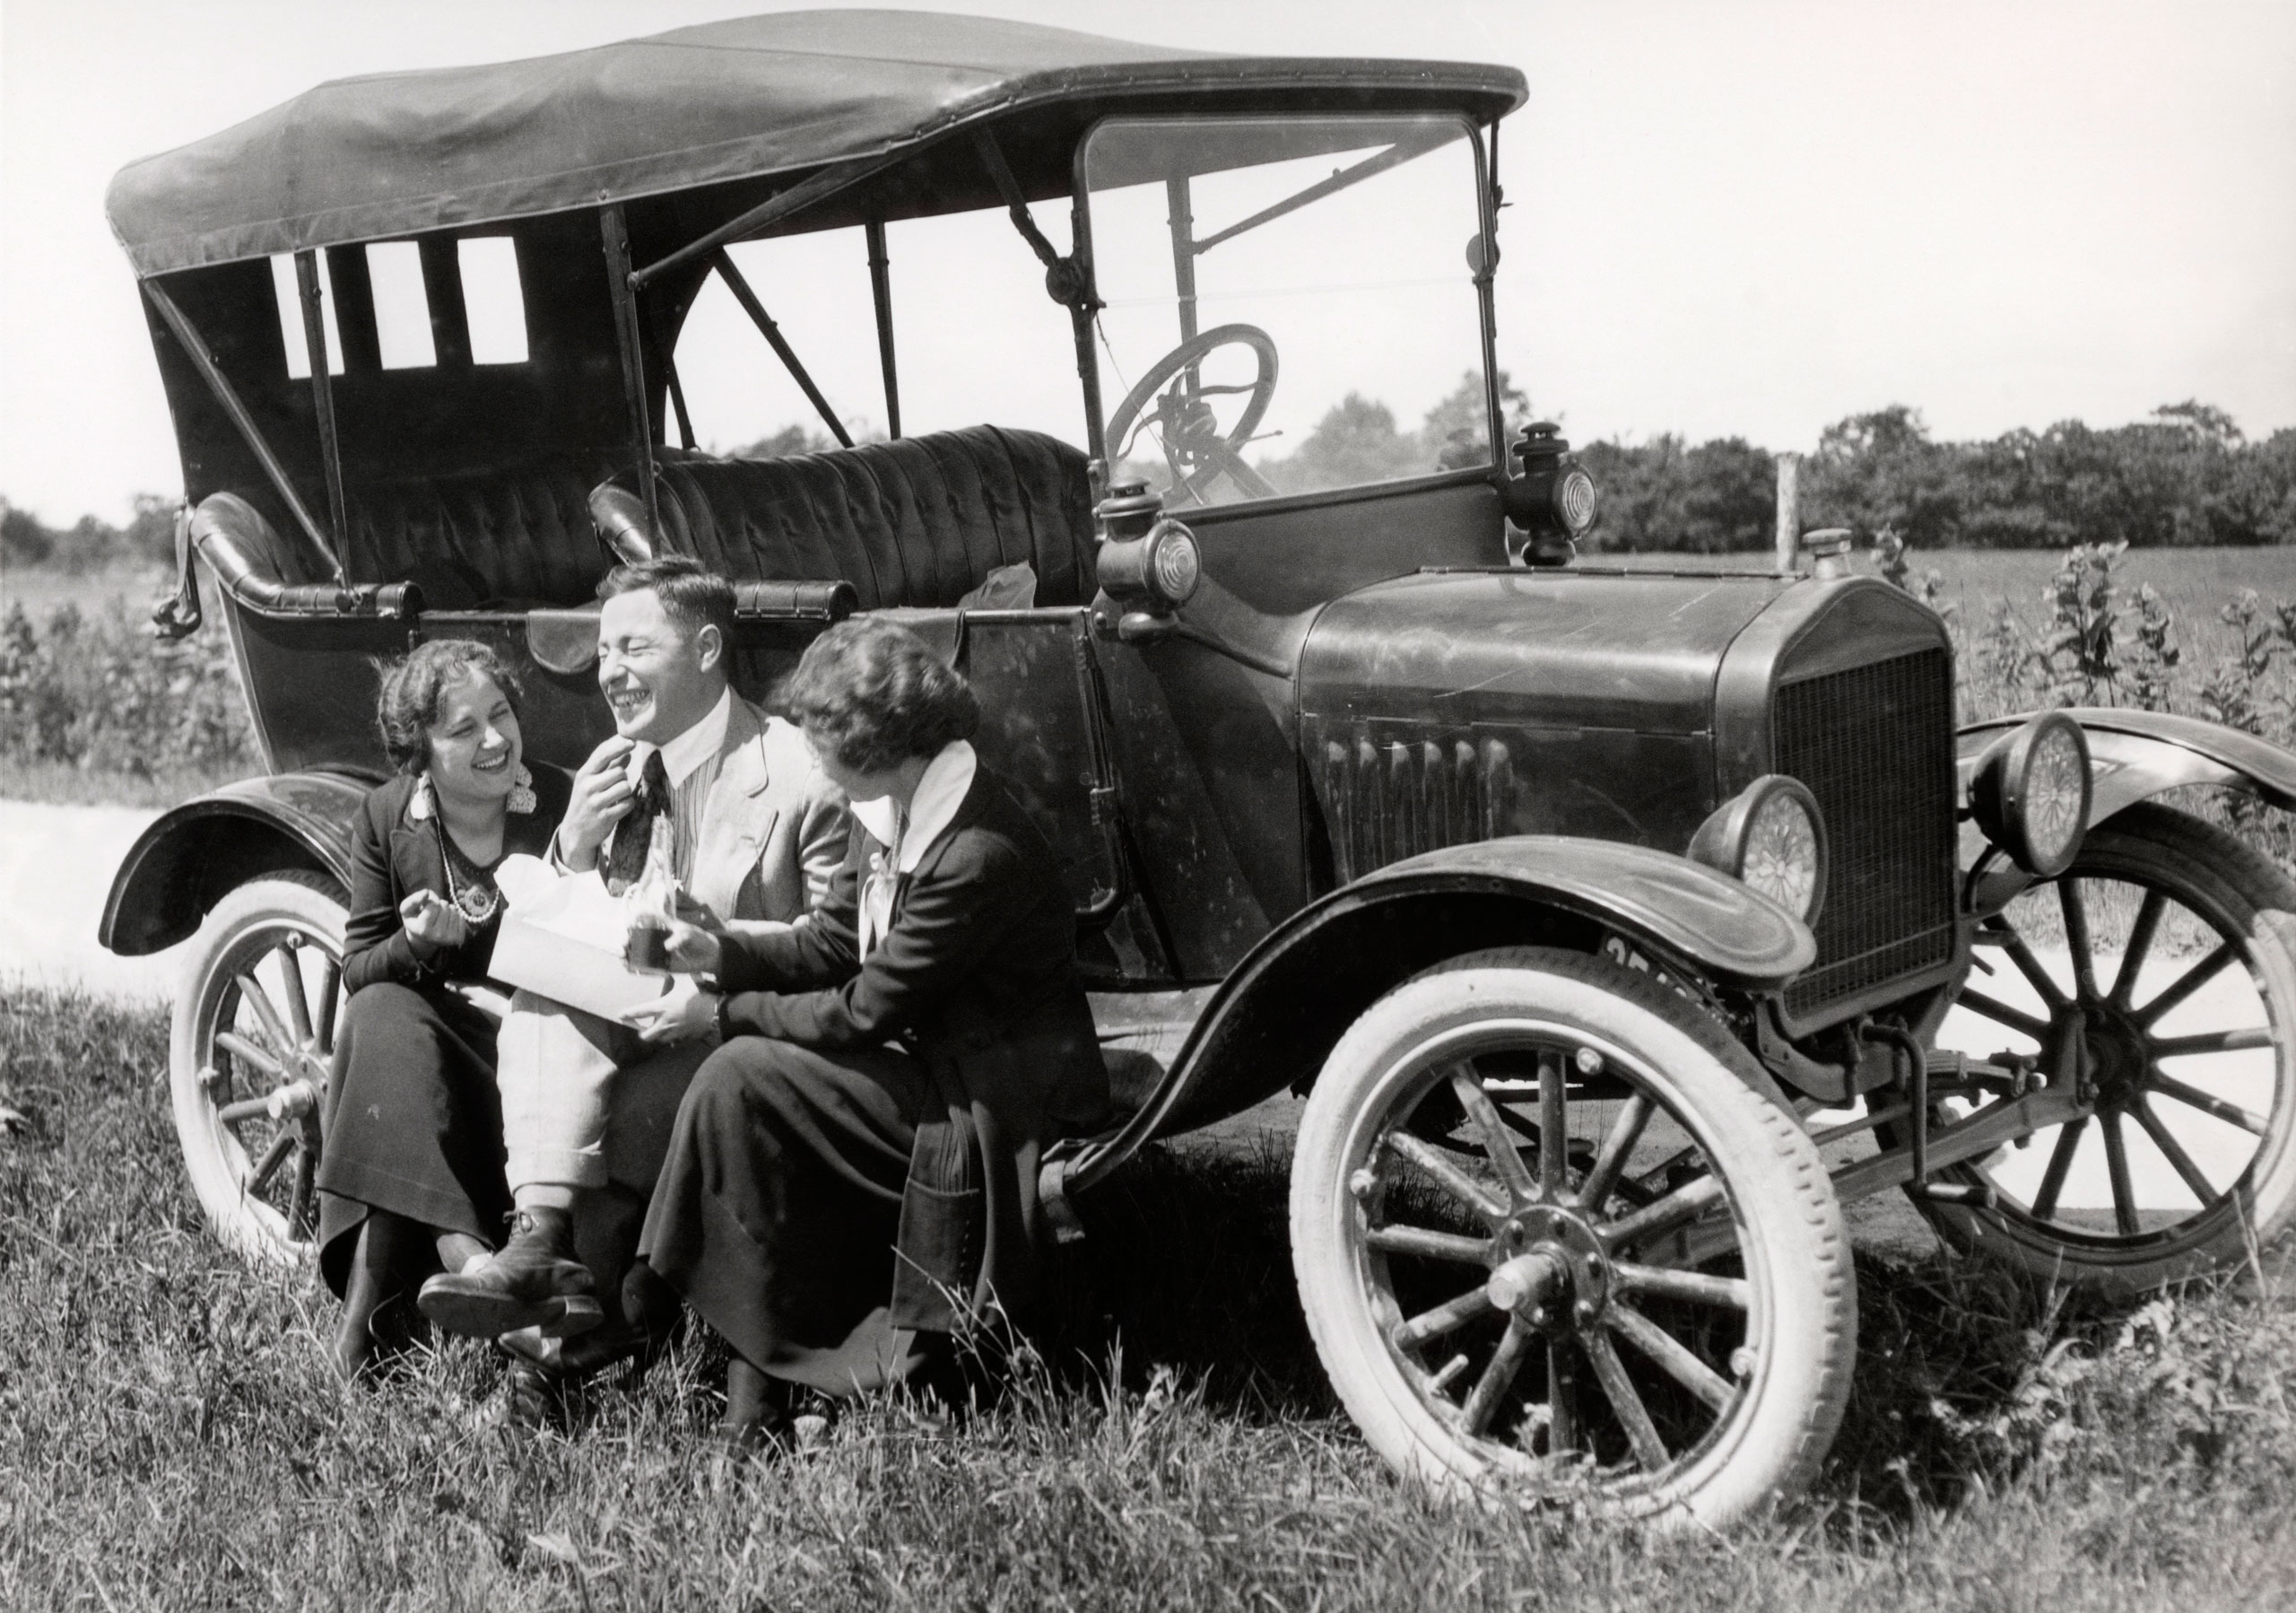 Two women and one man sitting on the running board of a Model T Ford eating lunch, 1920.